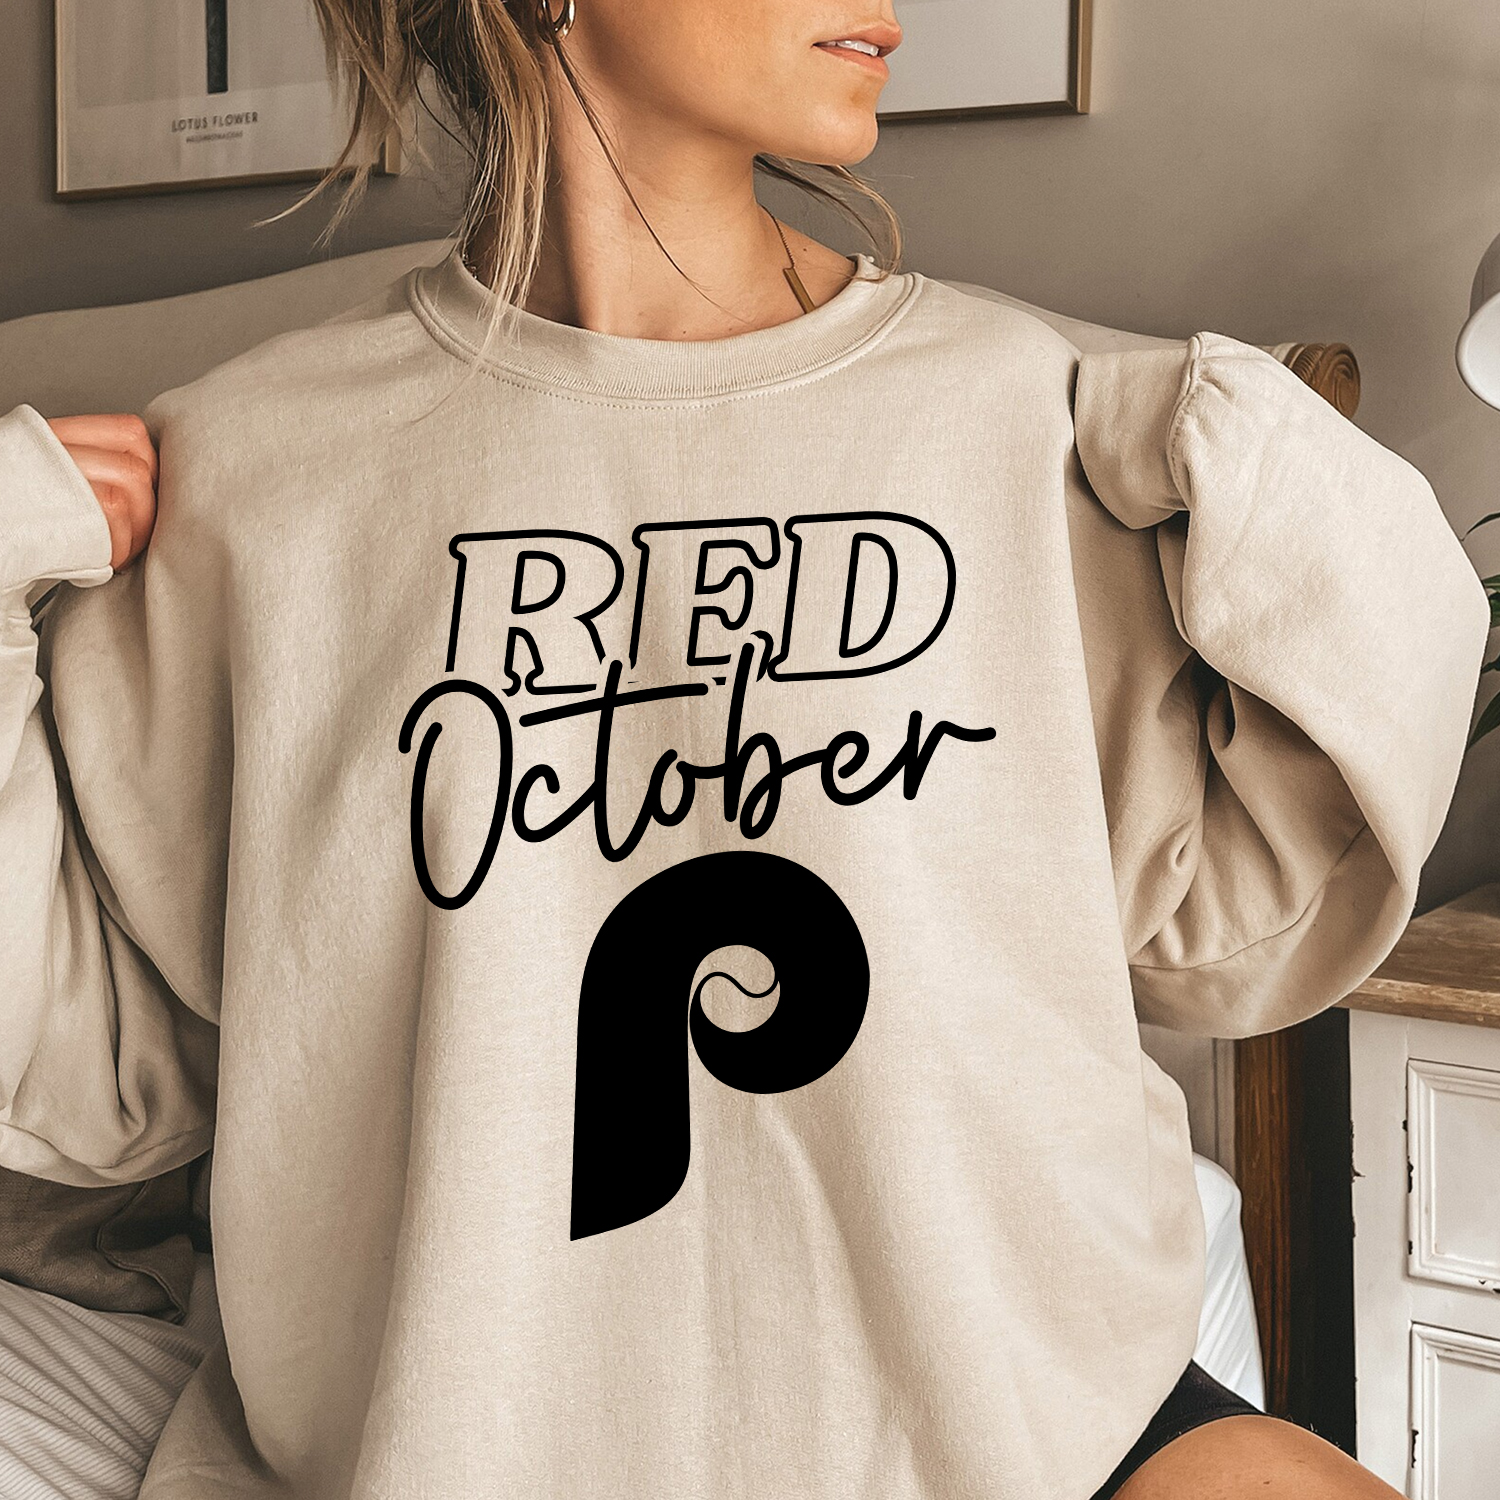 Phillies Philly Red October Cute Ghost shirt